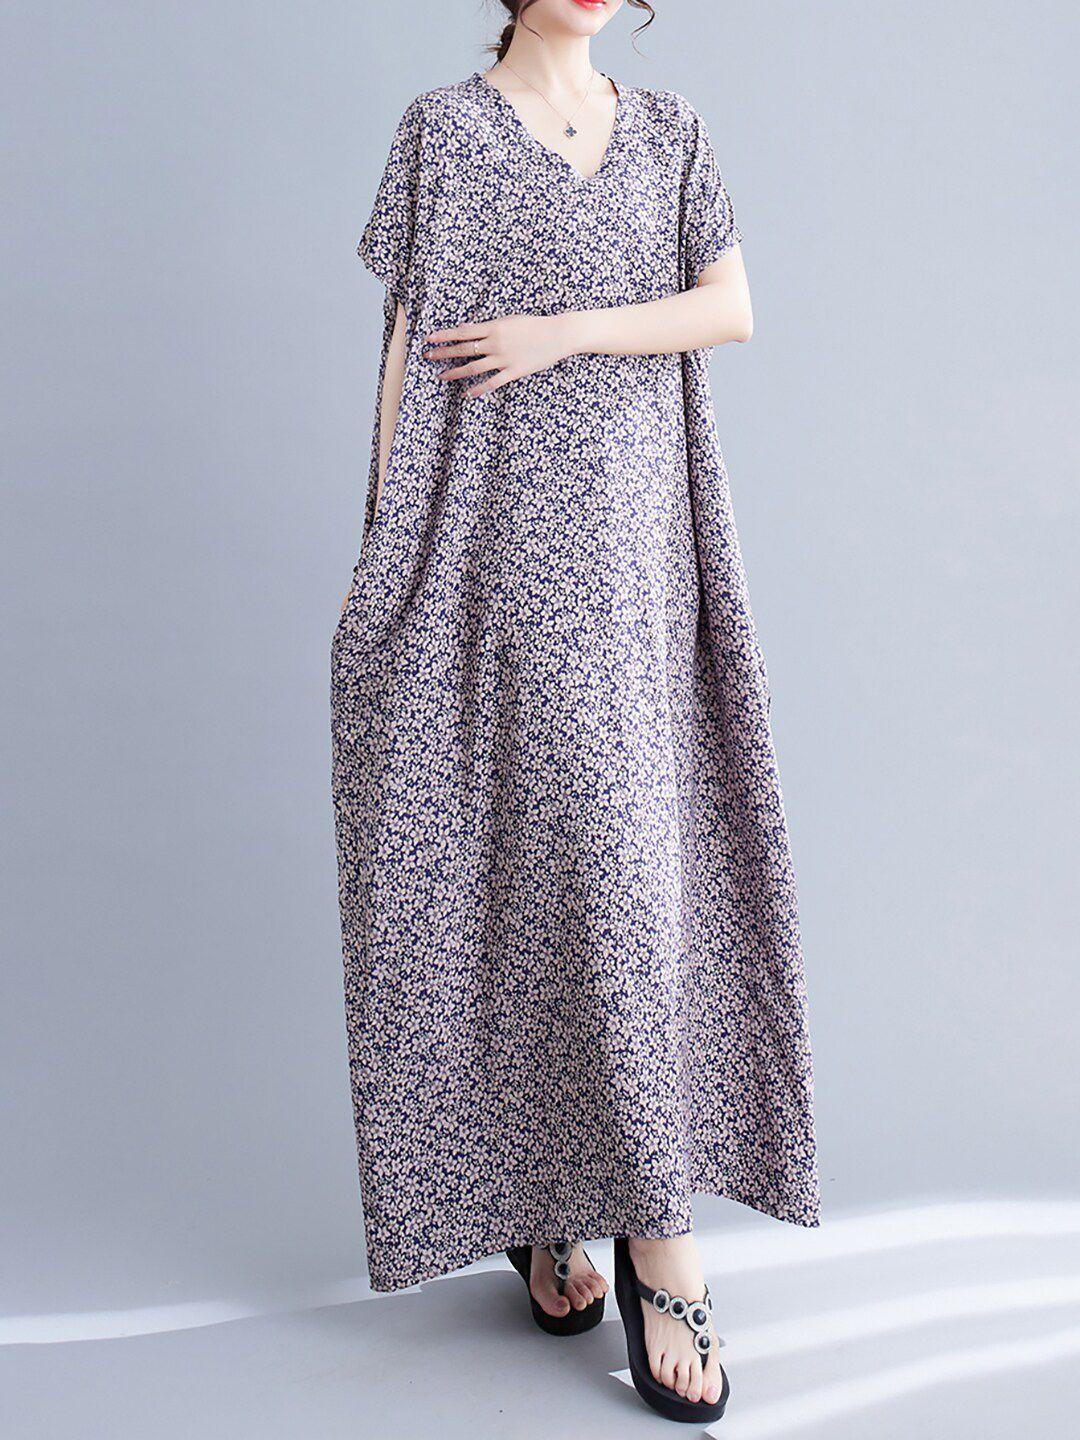 jc mode floral printed v-neck extended sleeves a-line maxi dress